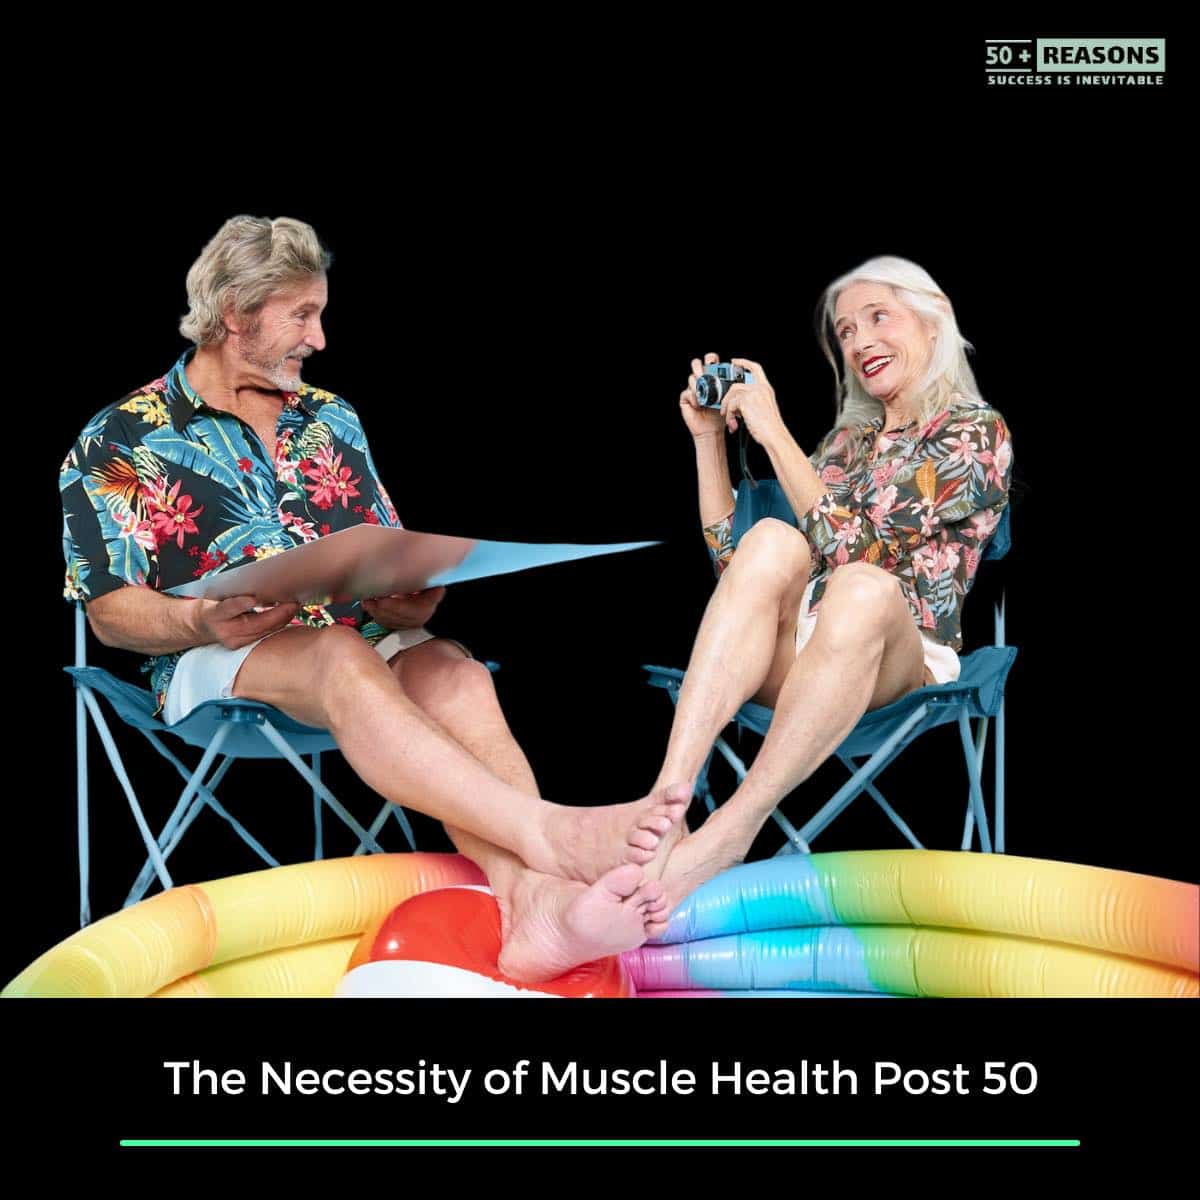 The Necessity of Muscle Health Post 50